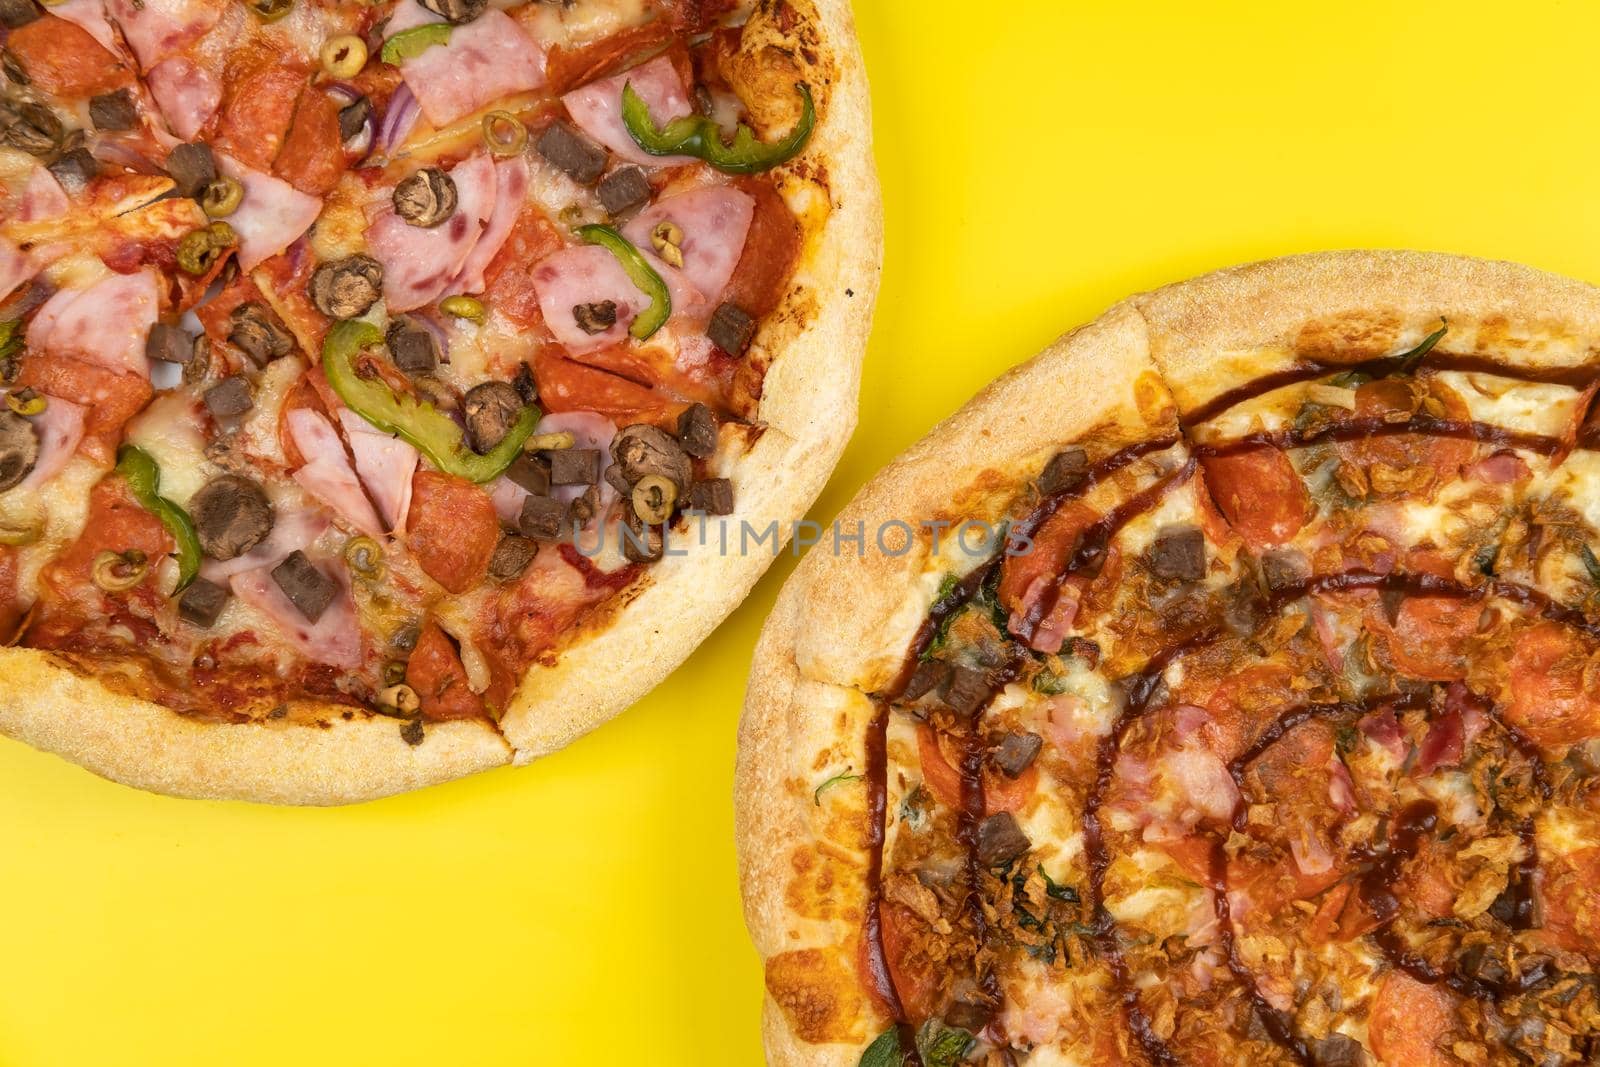 Two different Delicious big pizzas on a yellow background.